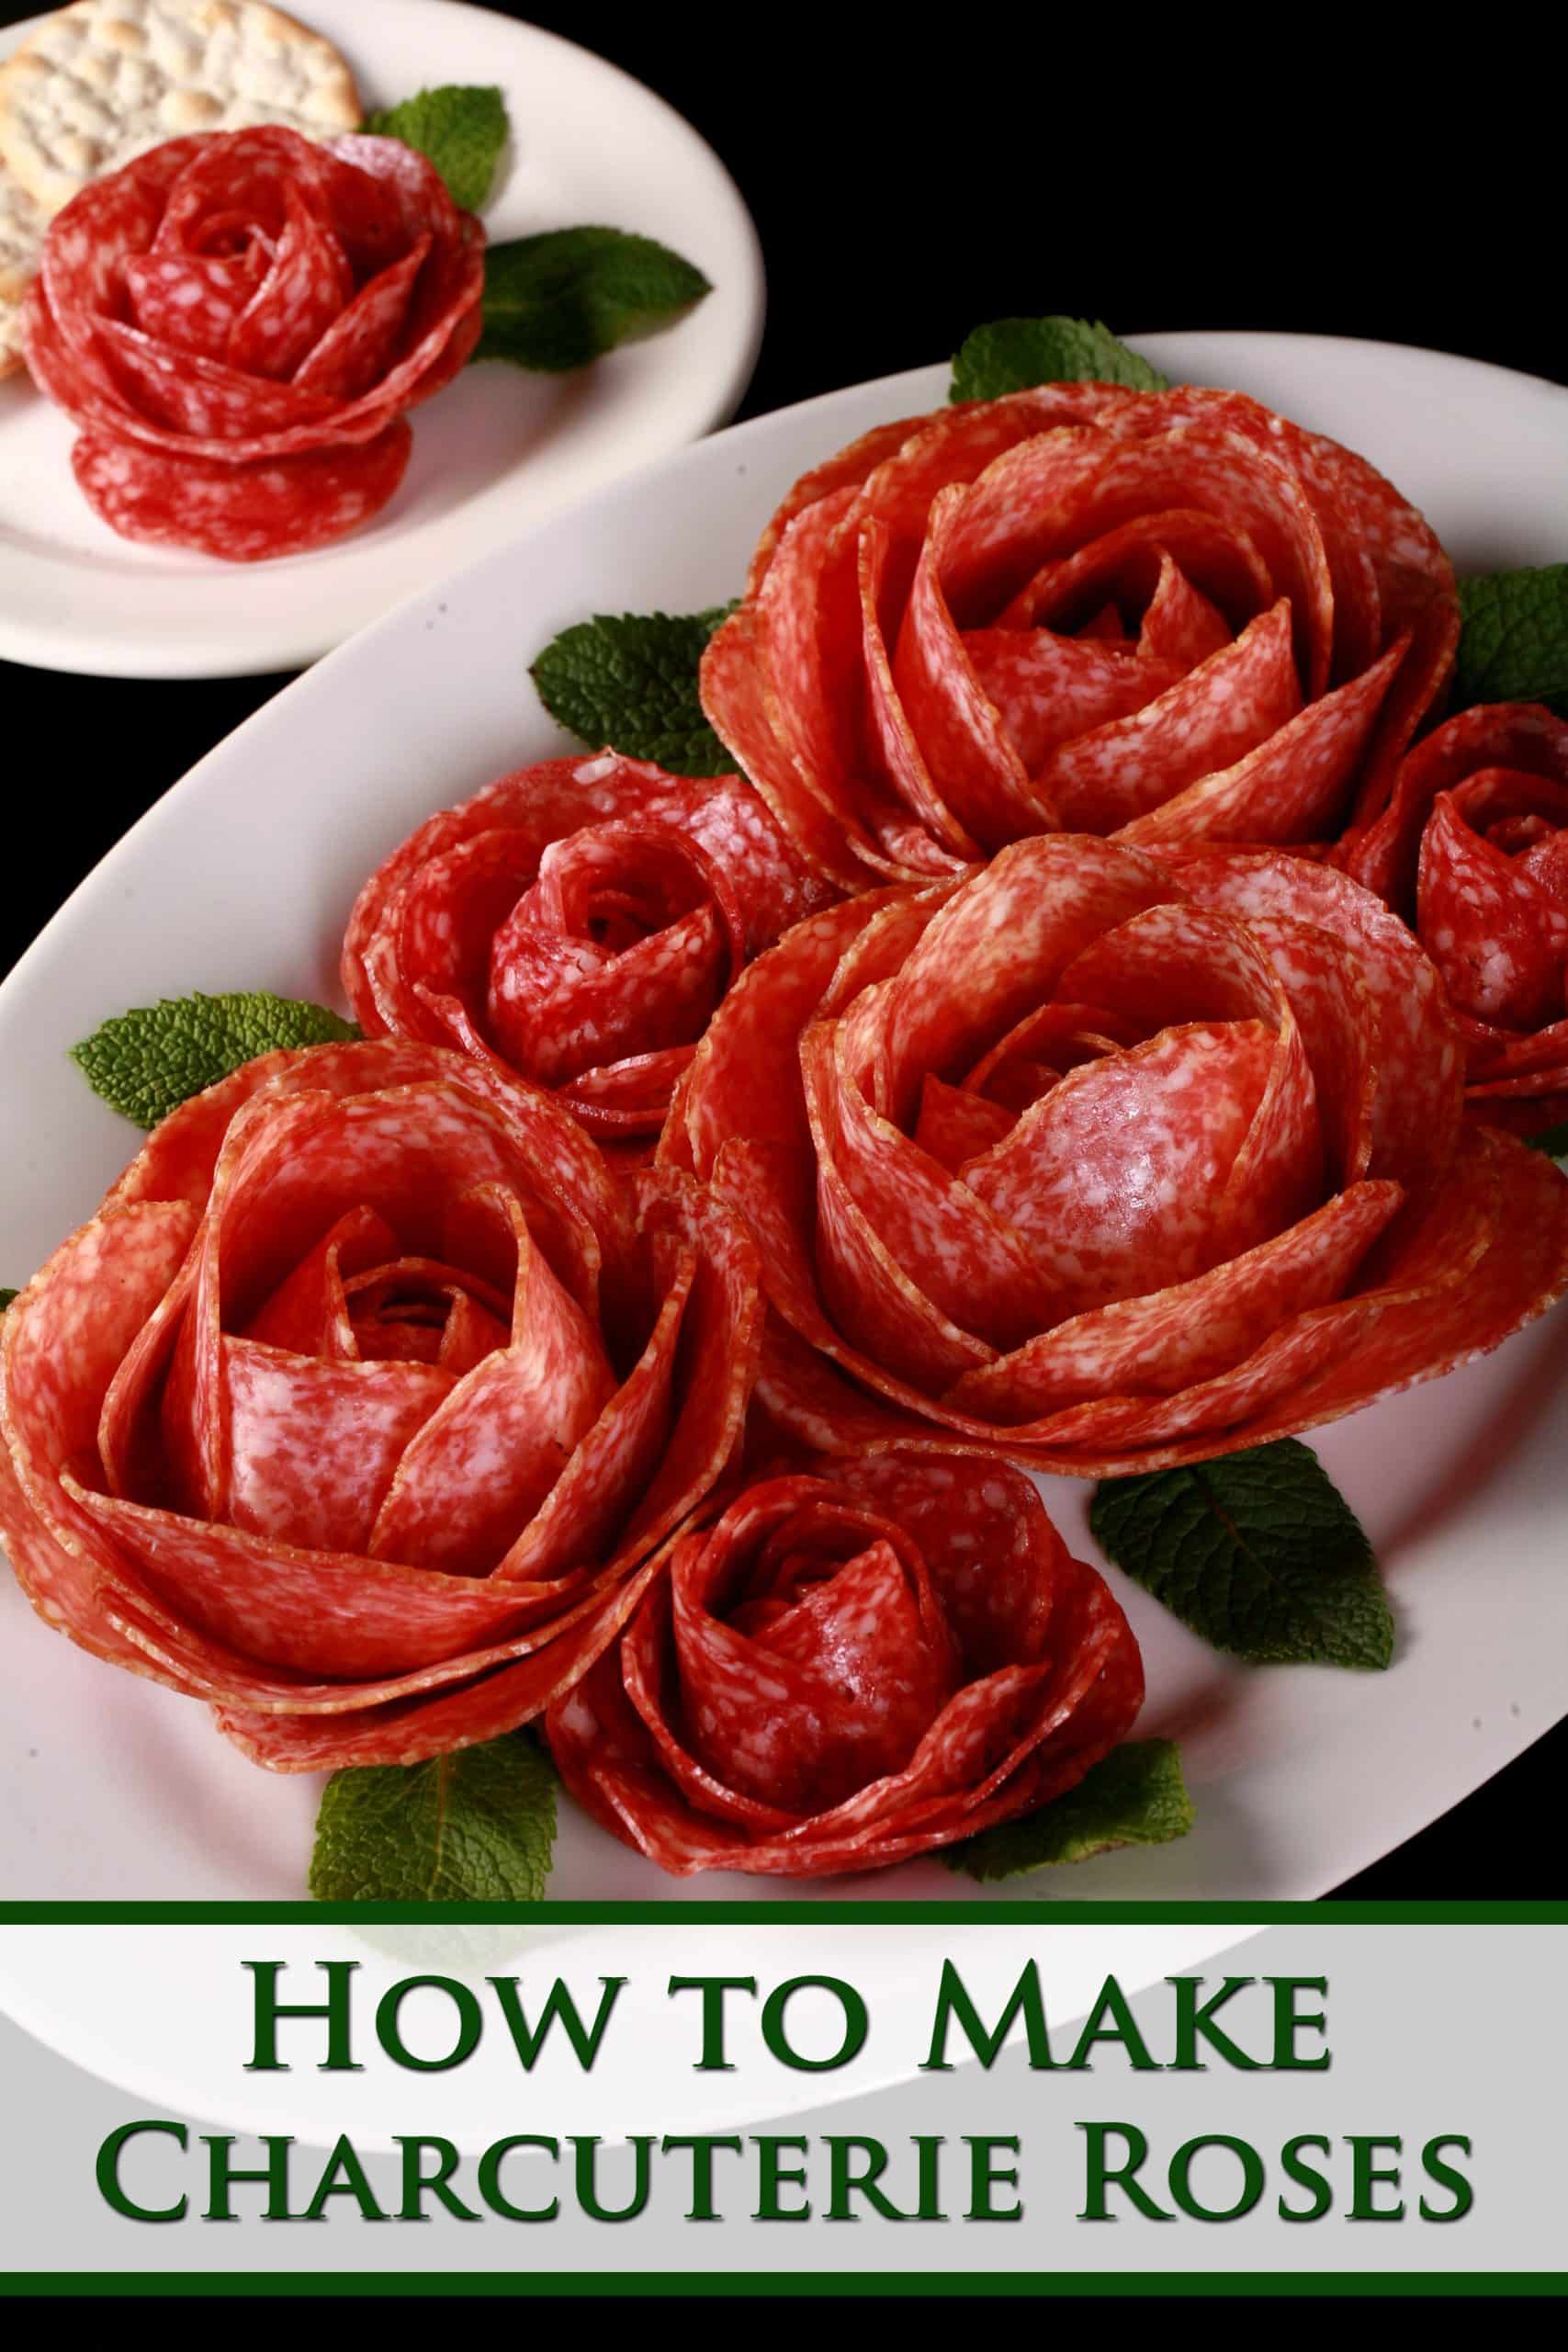 A plate of large and small salami roses, accented with mint leaves. Overlaid text says how to make charcuterie roses.